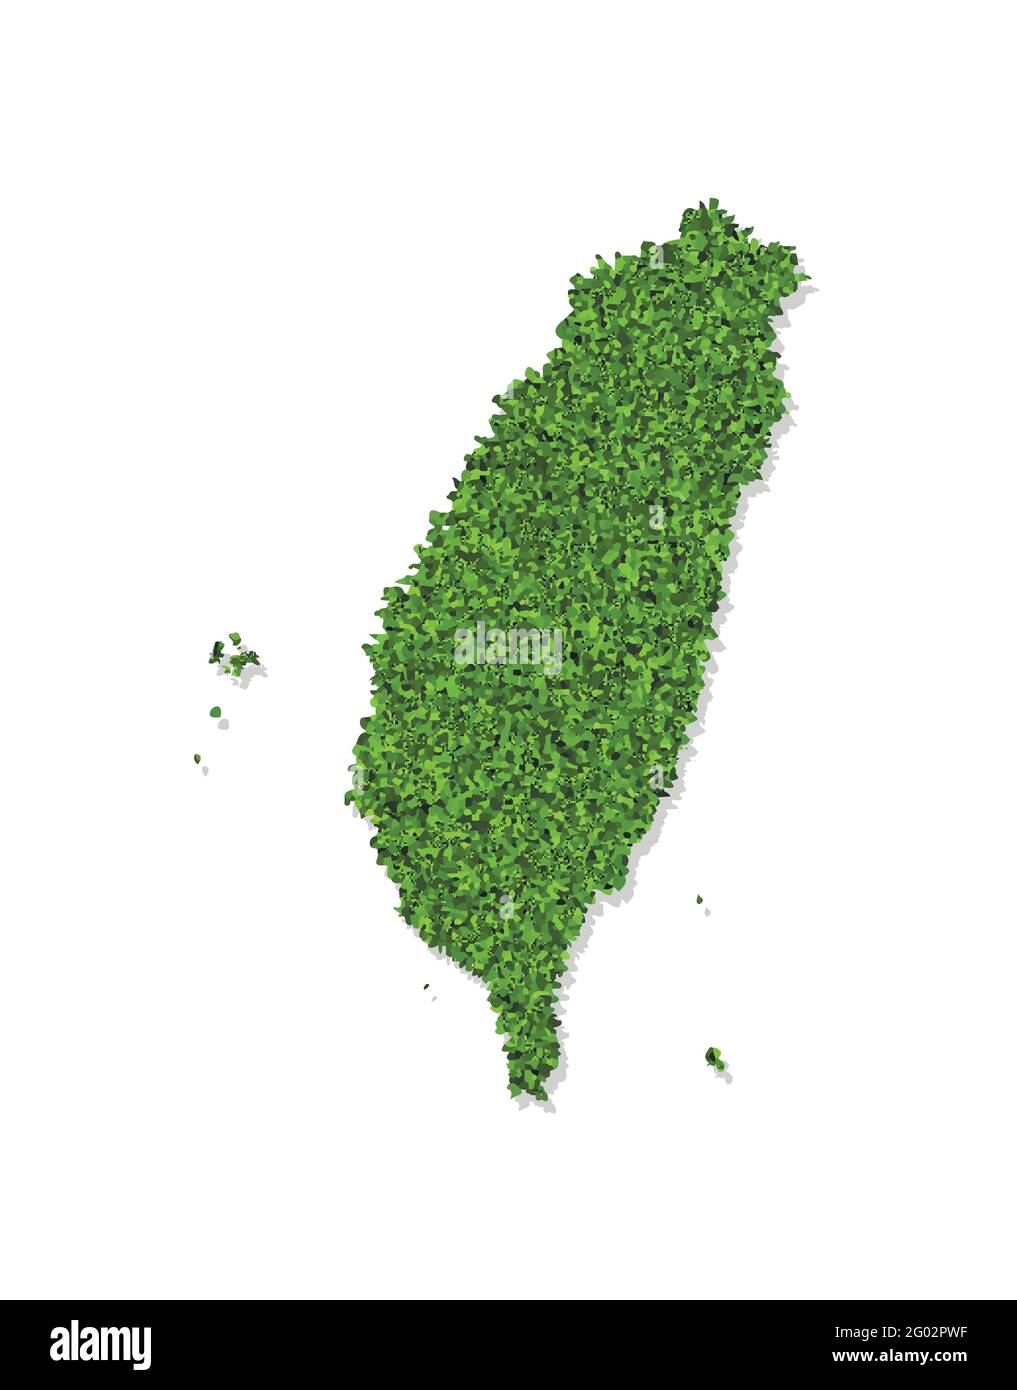 Vector isolated simplified illustration icon with green grassy silhouette of Taiwan (ROC) map. White background Stock Vector